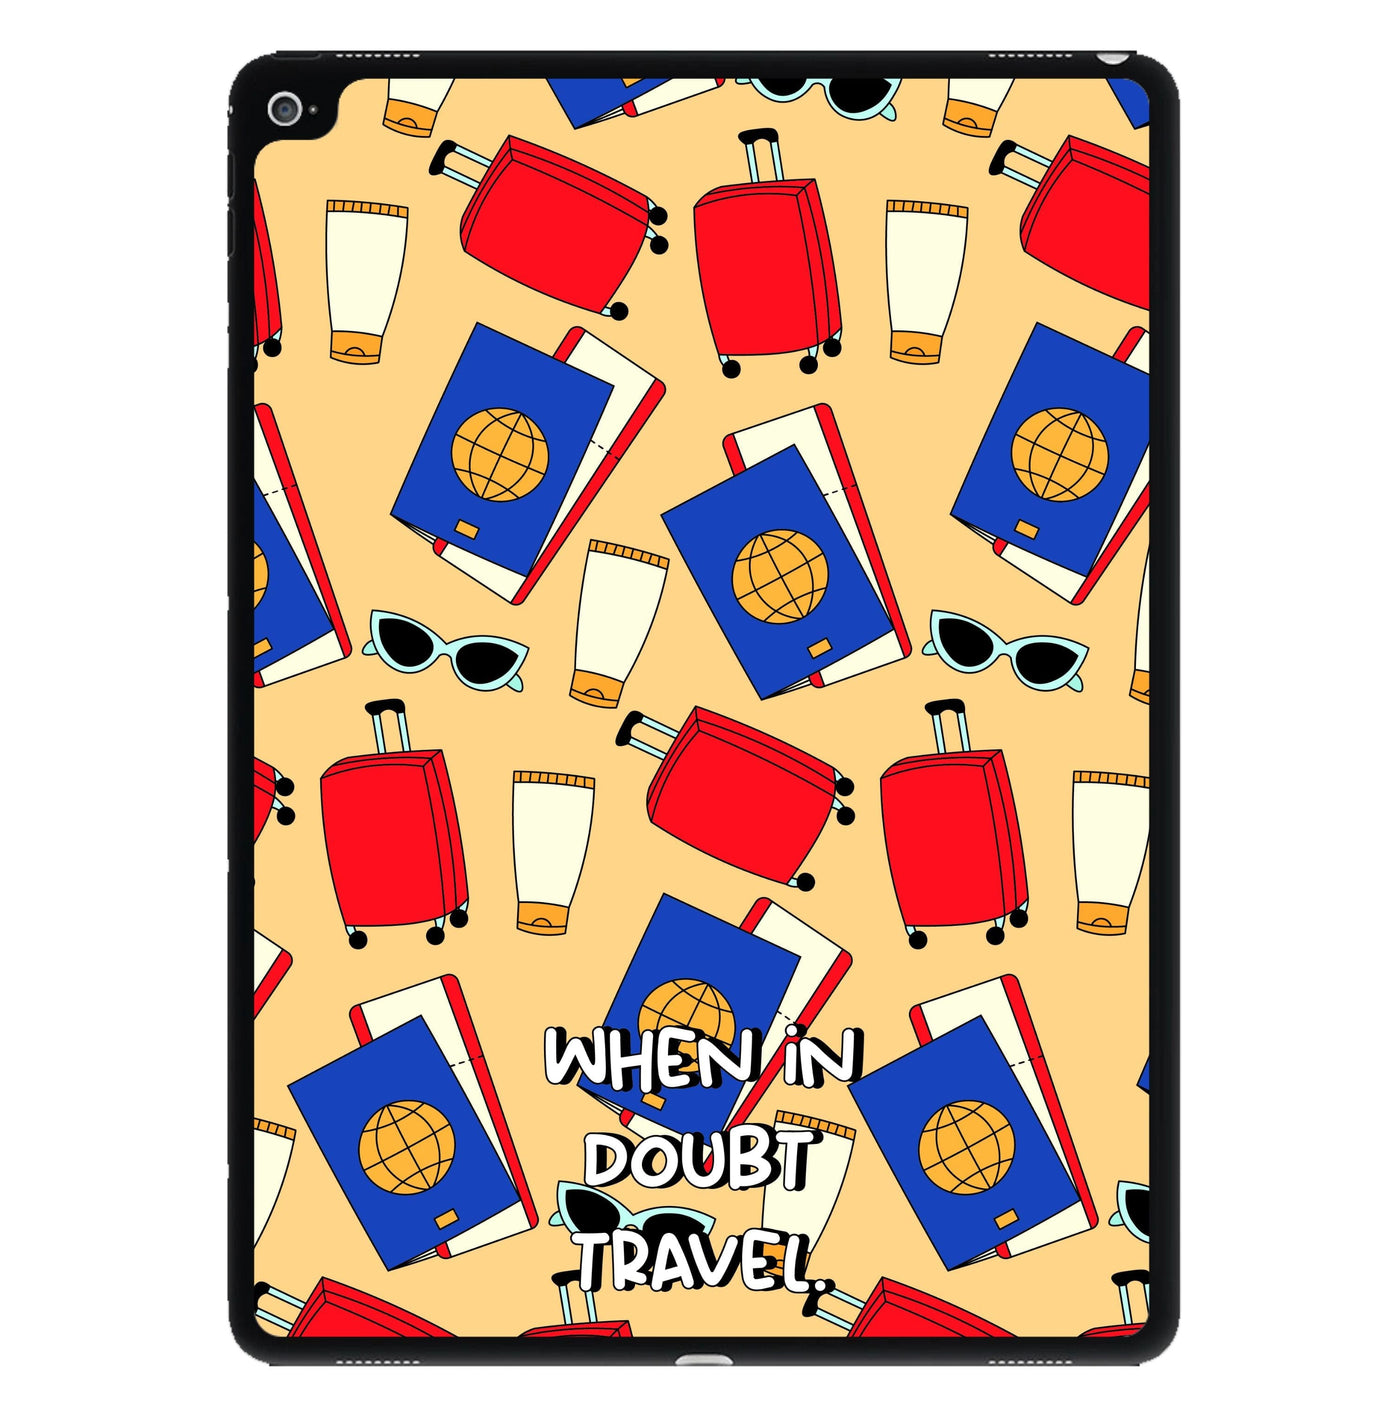 When In Doubt Travel - Travel iPad Case